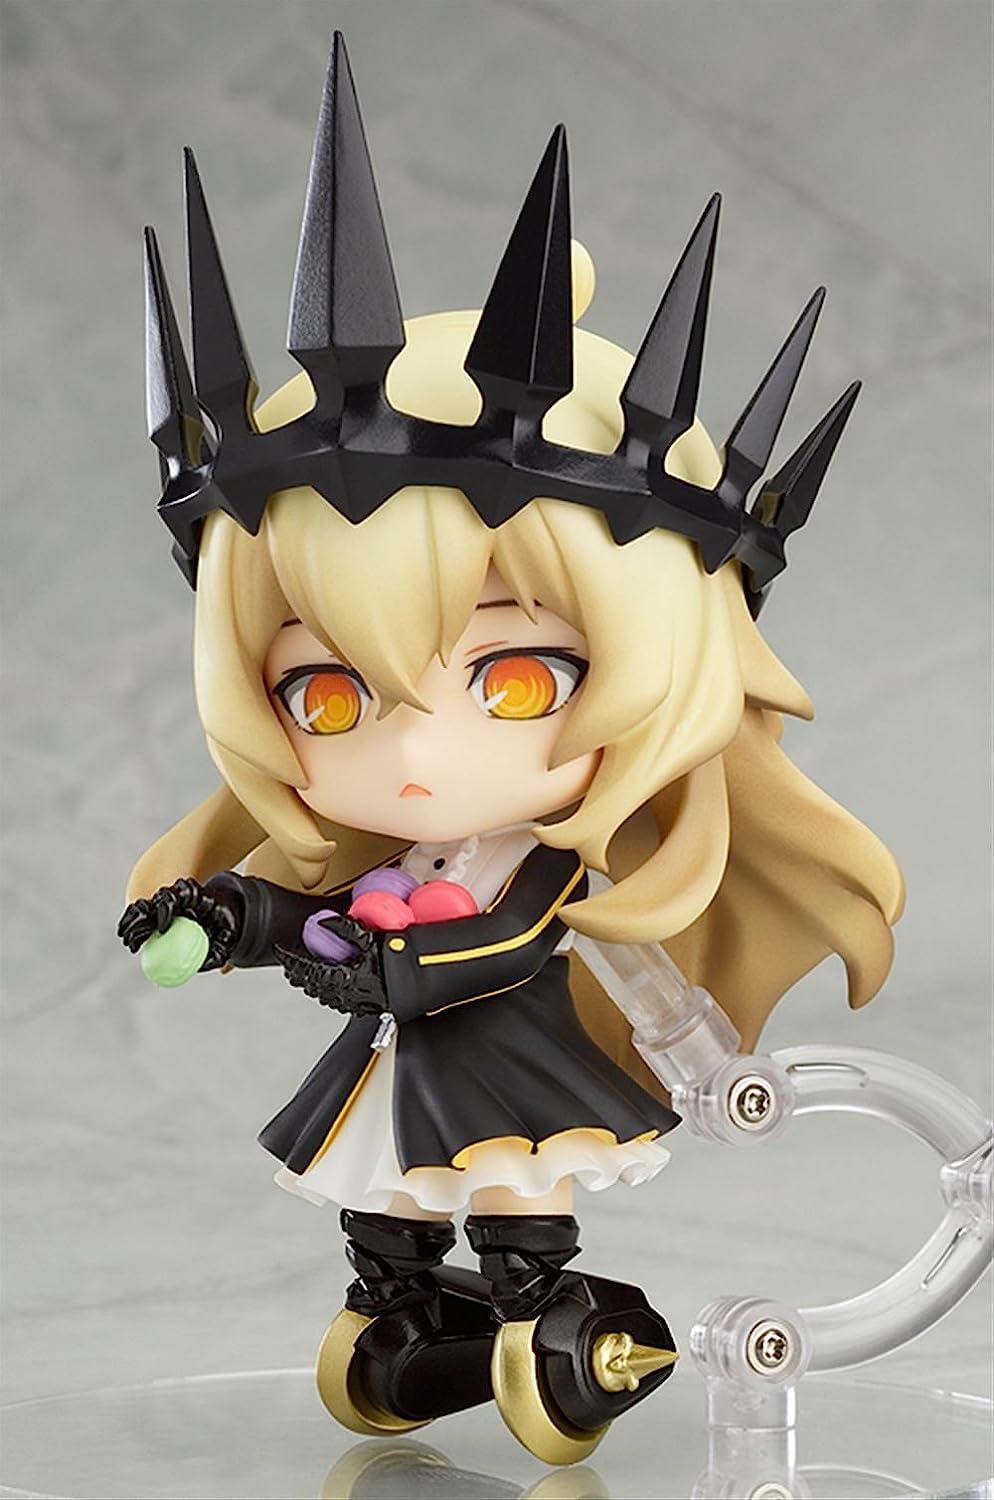 Nendoroid - Chariot with Mary (Tank) Set TV ANIMATION Ver. from "Black Rock Shooter" | animota